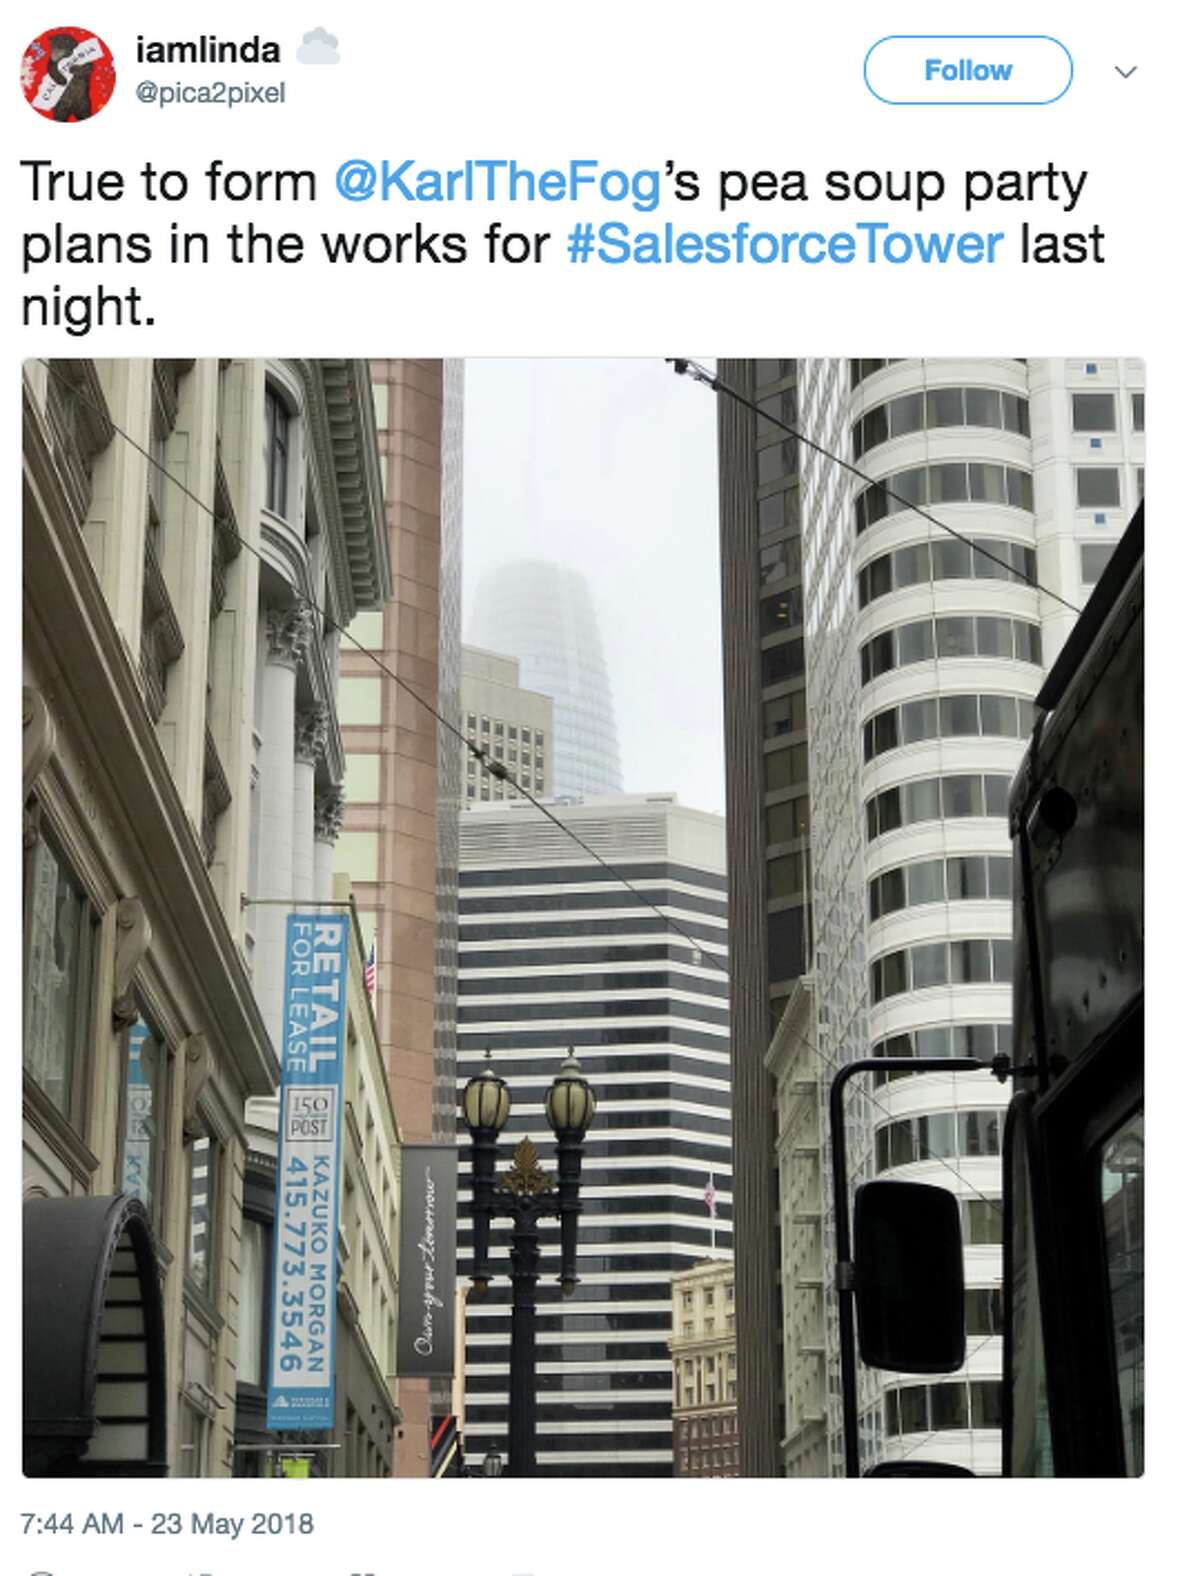 Karl the Fog upstaged the opening of the Salesforce Tower on May 22, 2018.